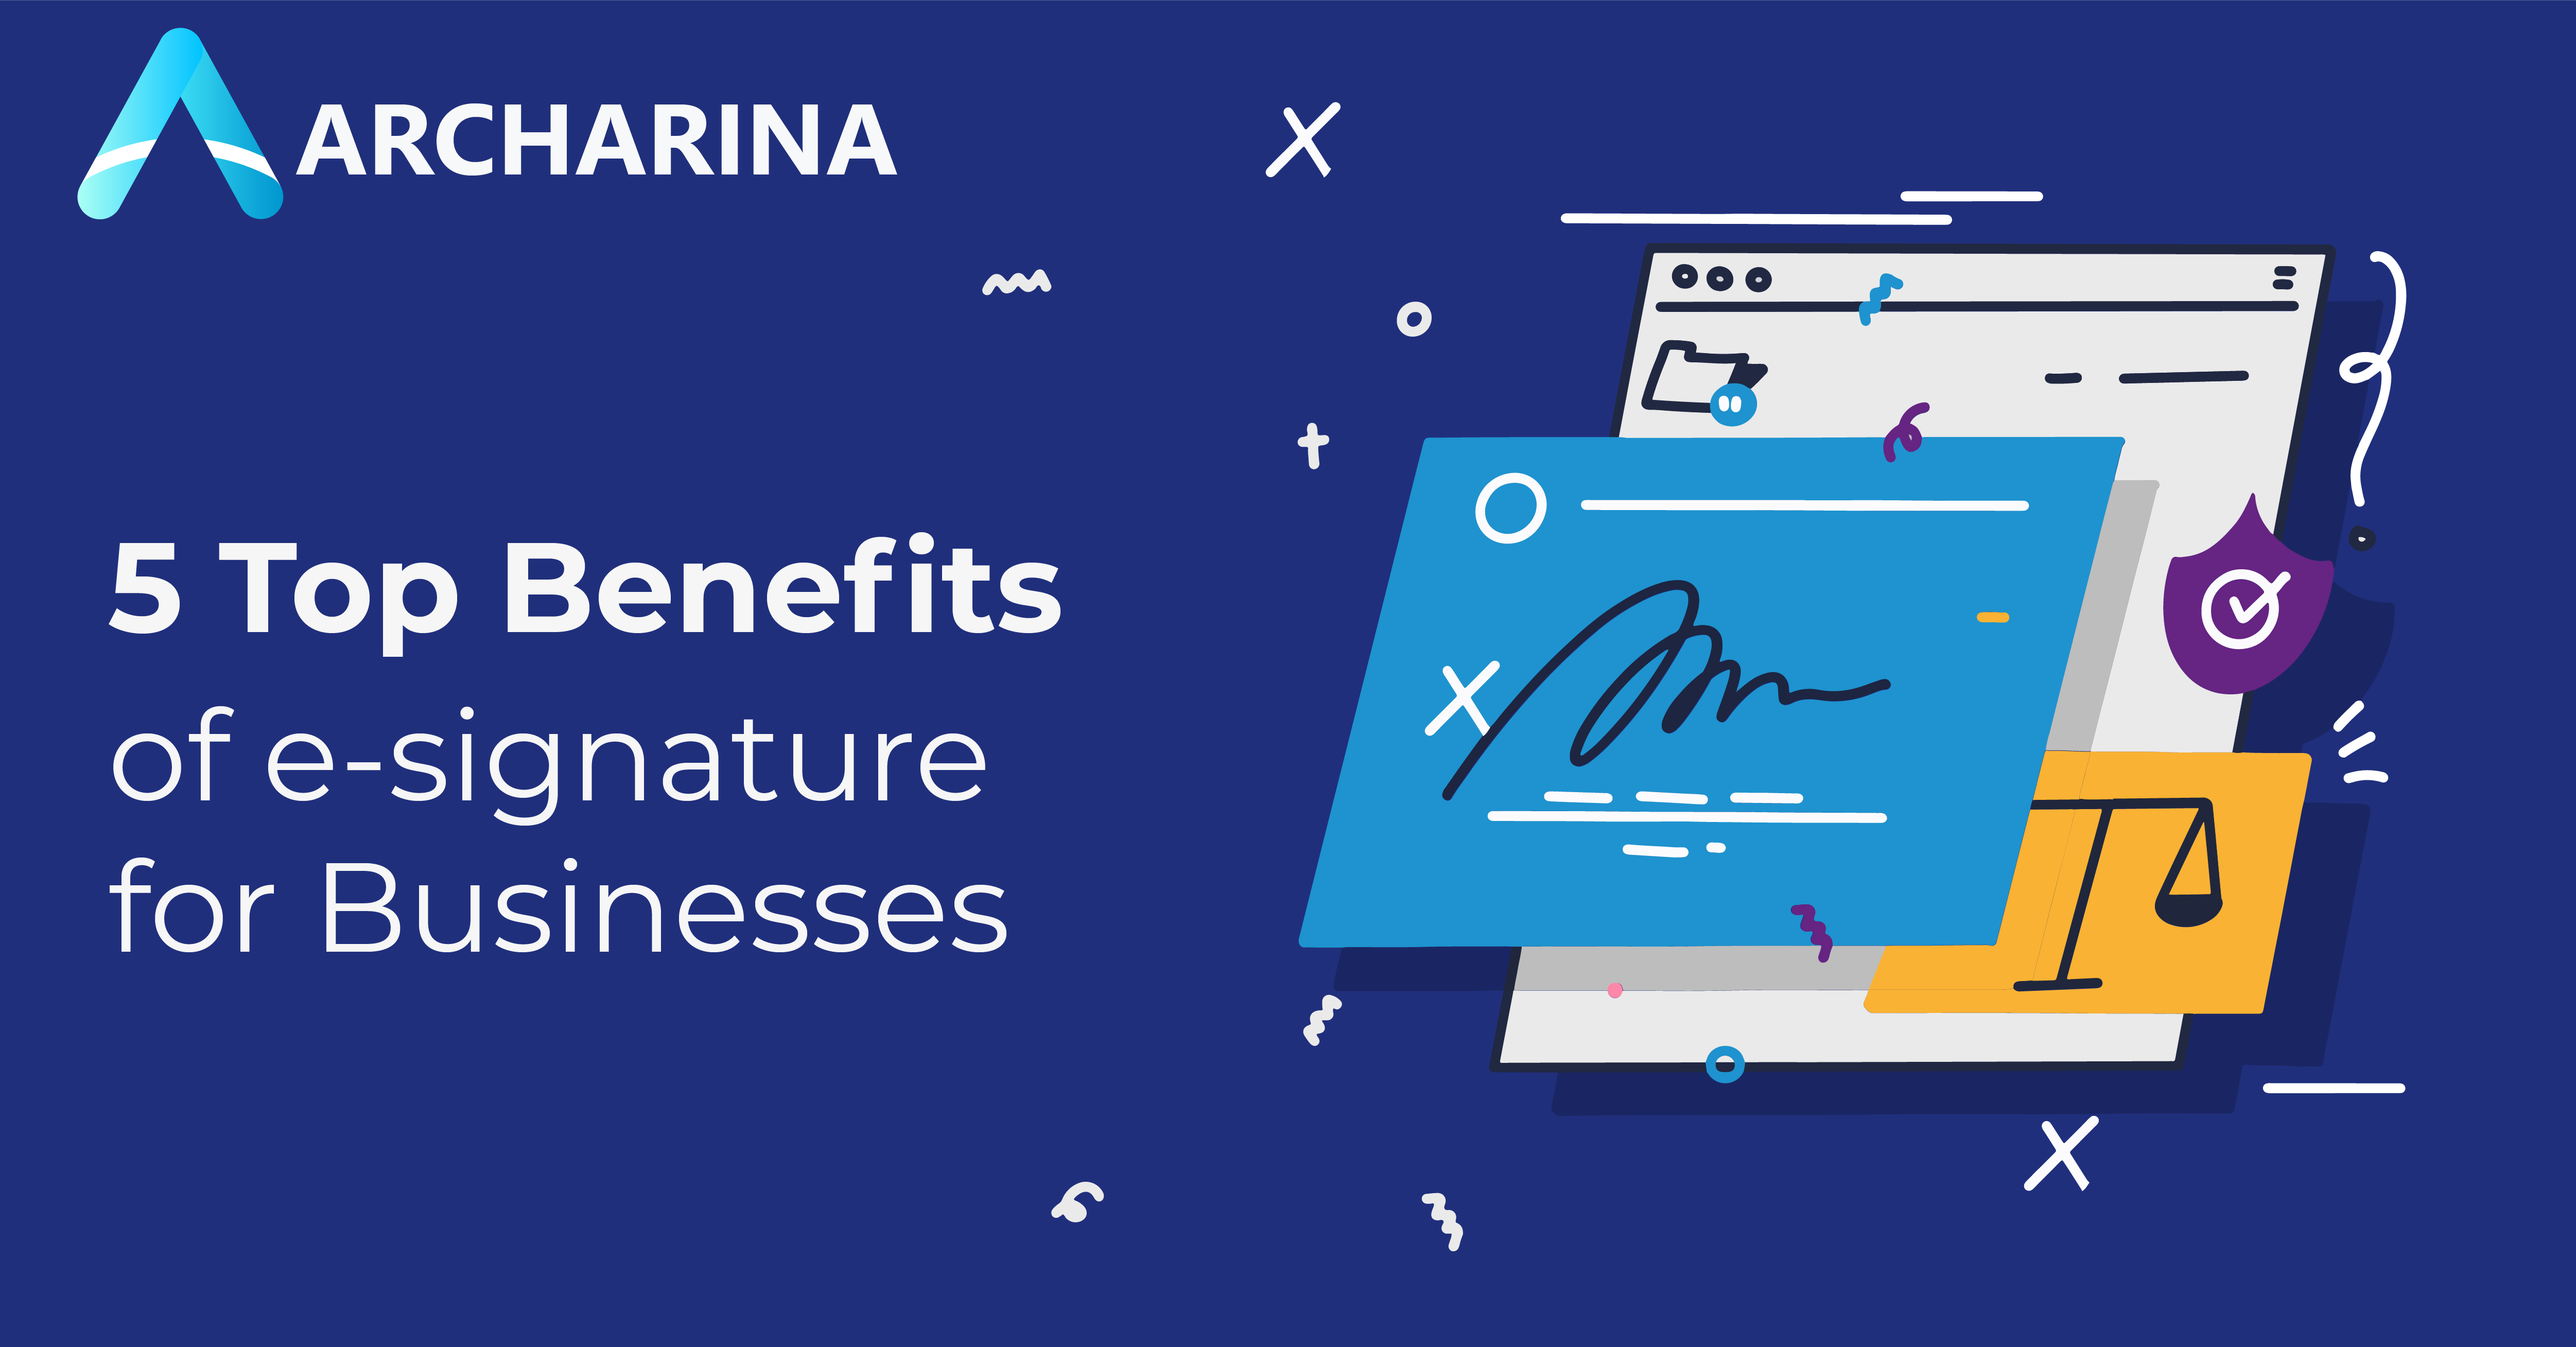 5 Top Benefits of e-signature for Businesses